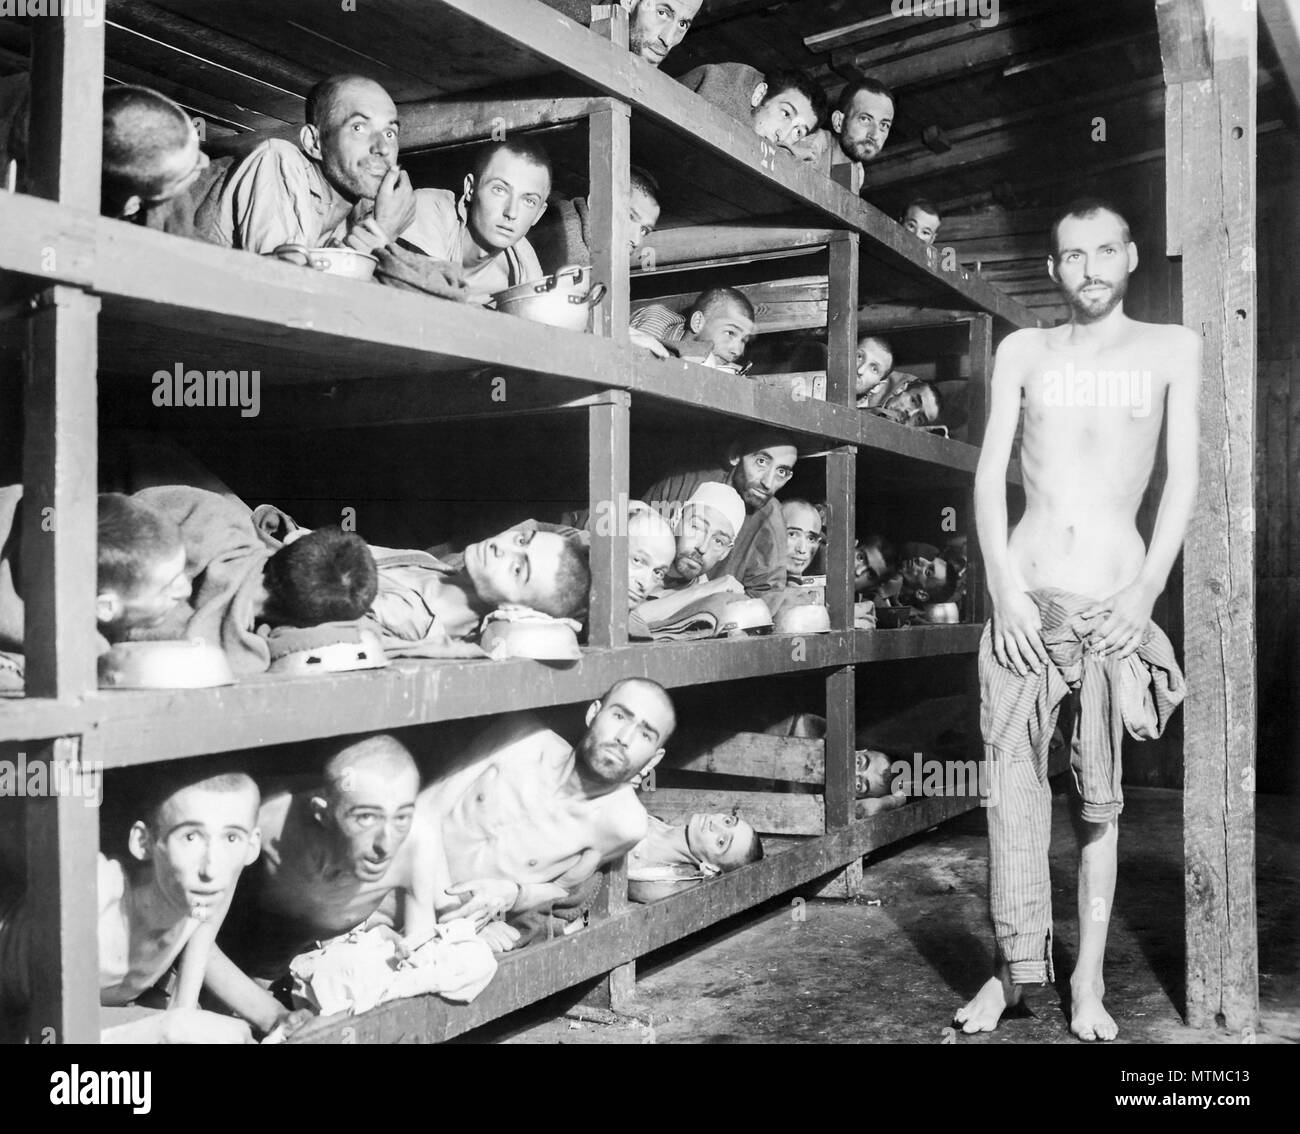 Buchenwald Concentration Camp on April 16, 1945. Elie Wiesel, who later received the Nobel Peace Prize in 1986, is the 7th person from the left on the 2nd row from the bottom. Stock Photo